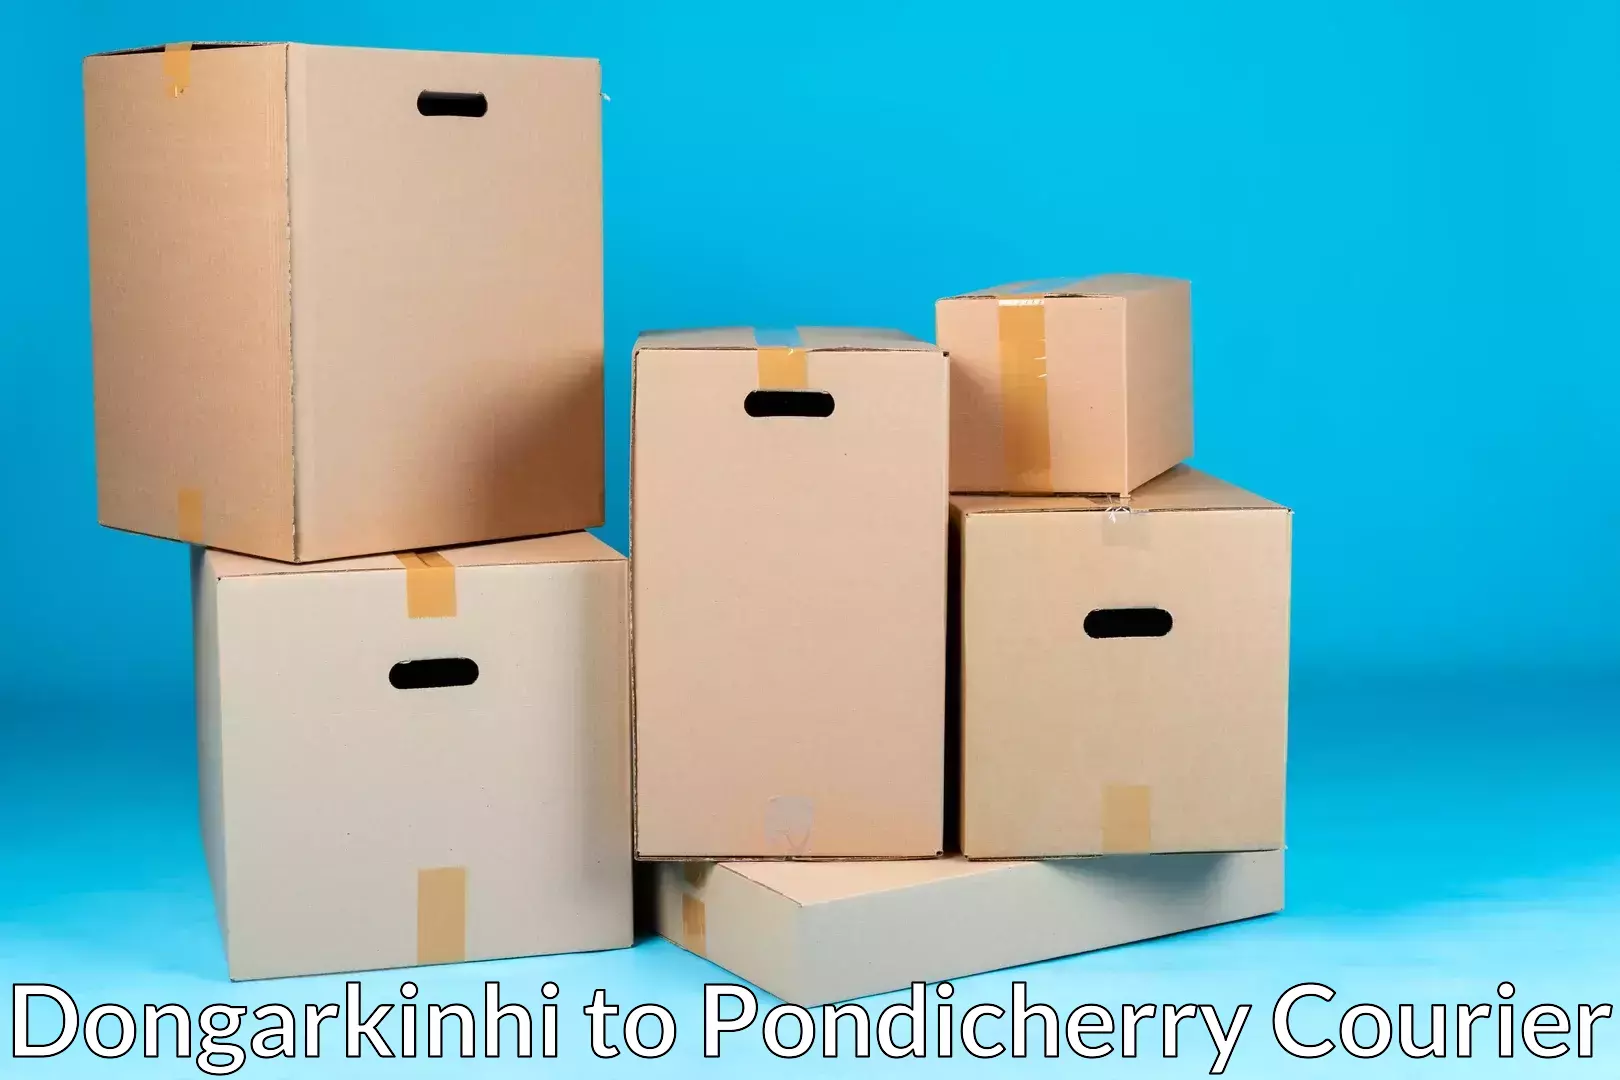 Advanced moving solutions Dongarkinhi to Pondicherry